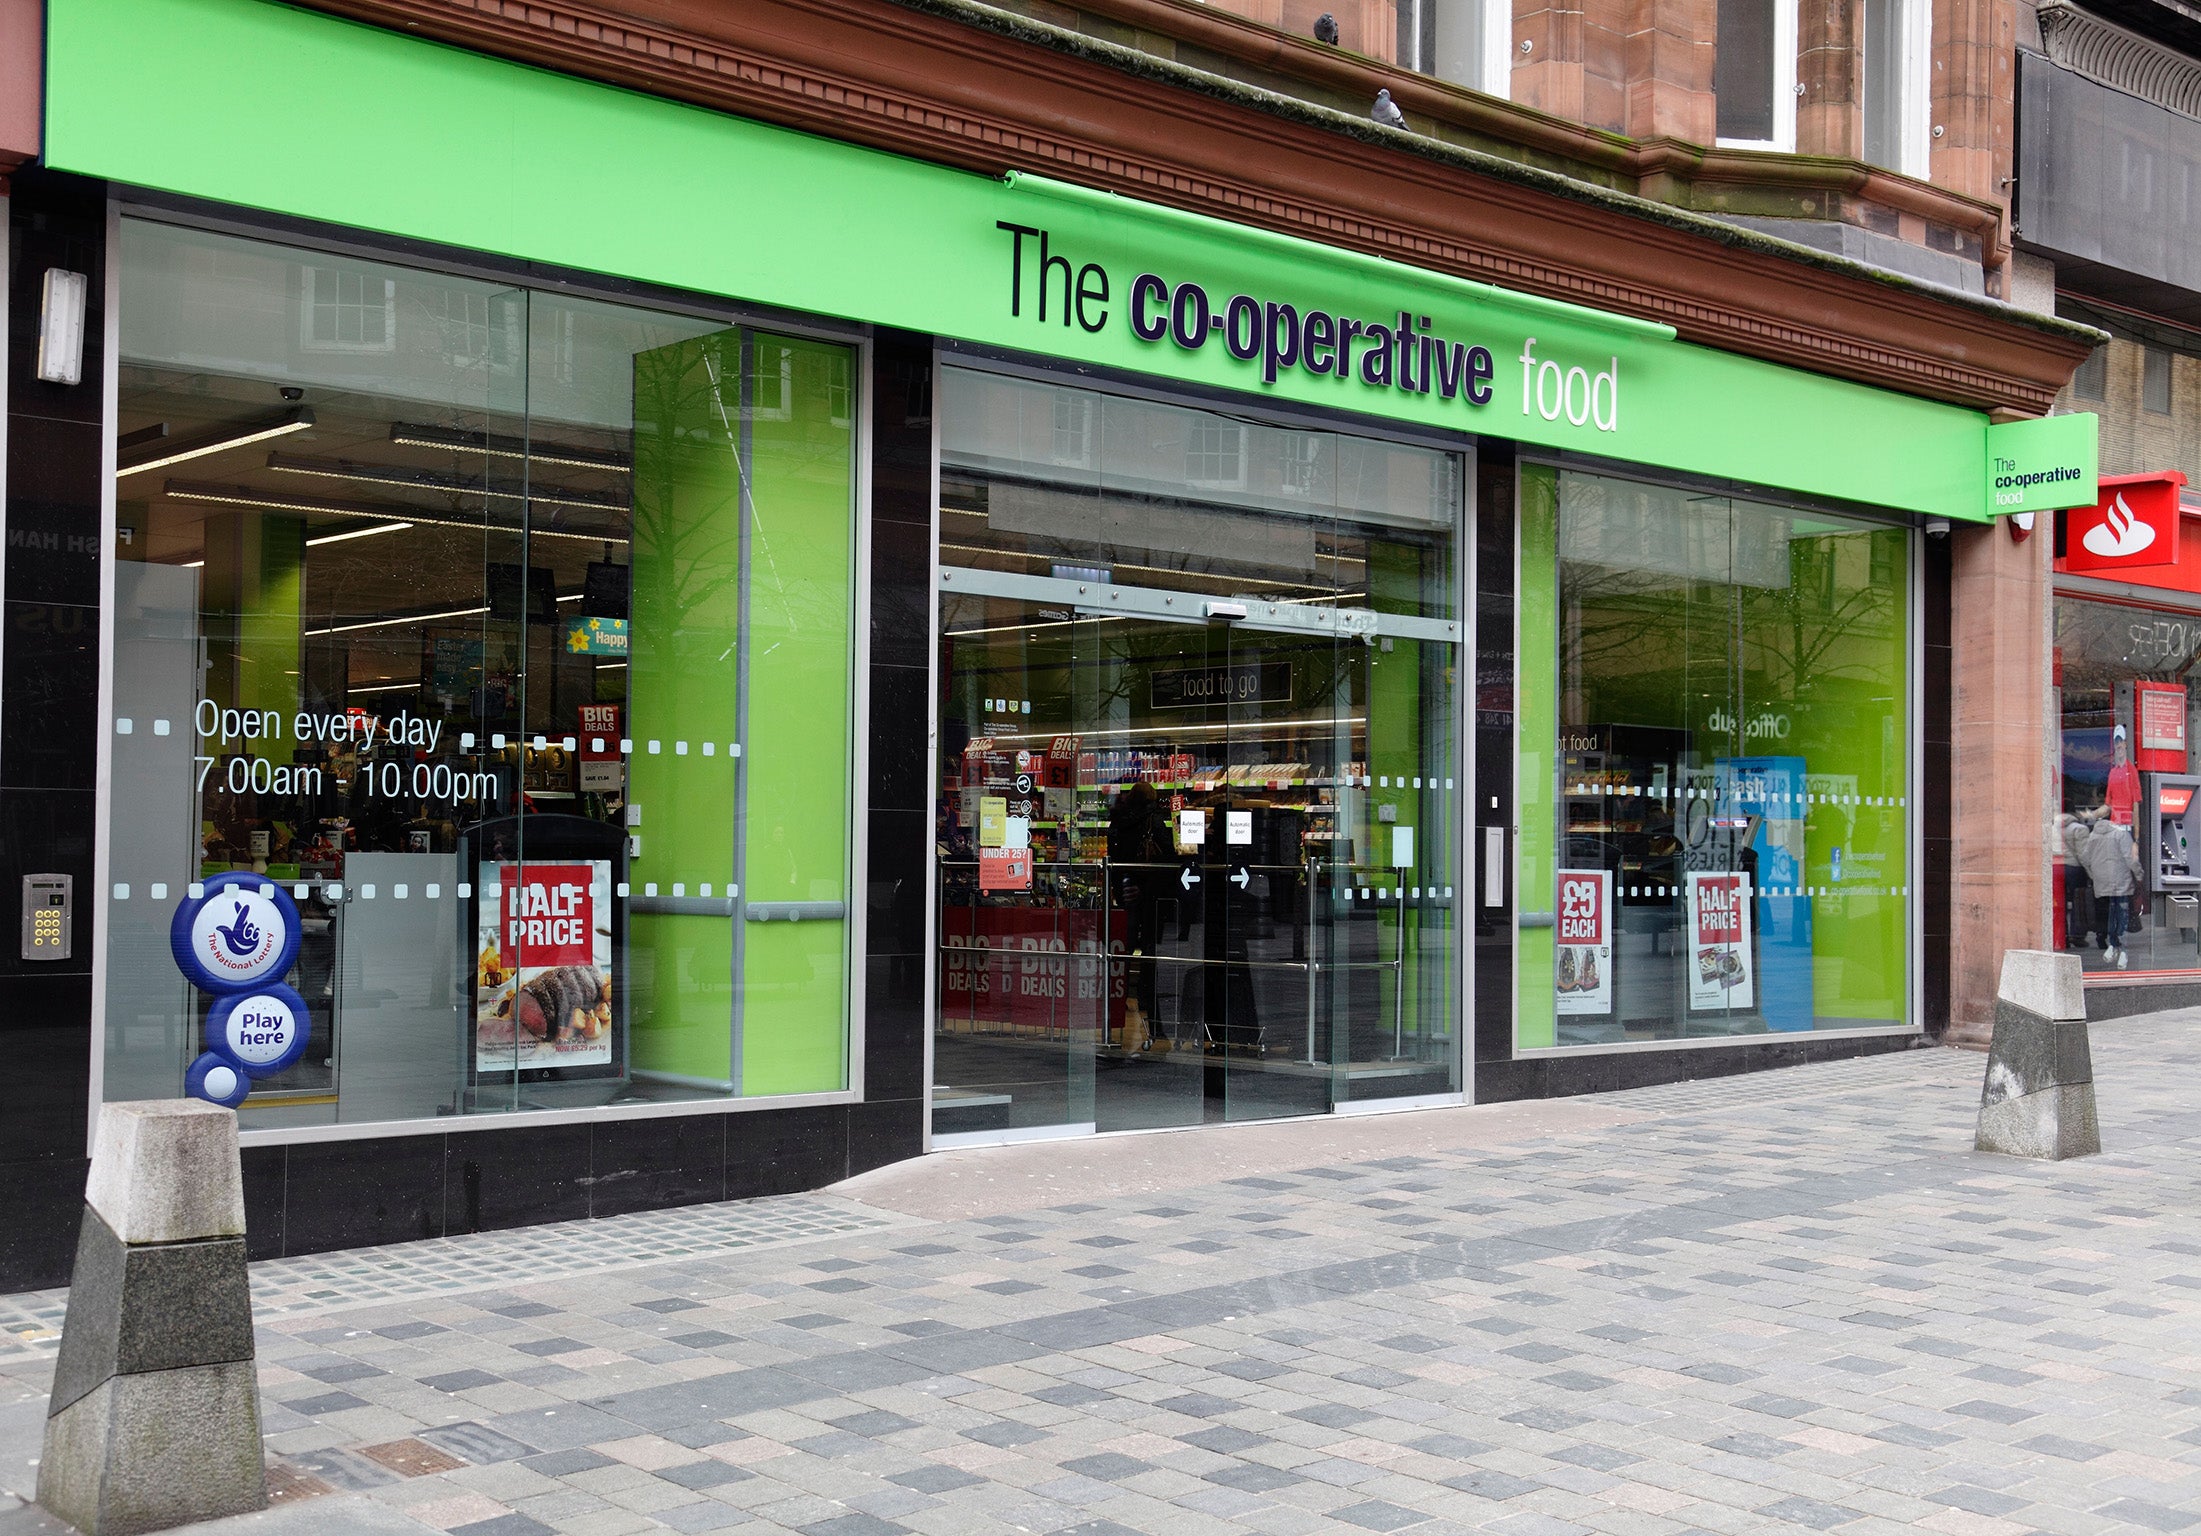 The Co-op grew its market share by 4.5 per cent in the 12 weeks to 2 December